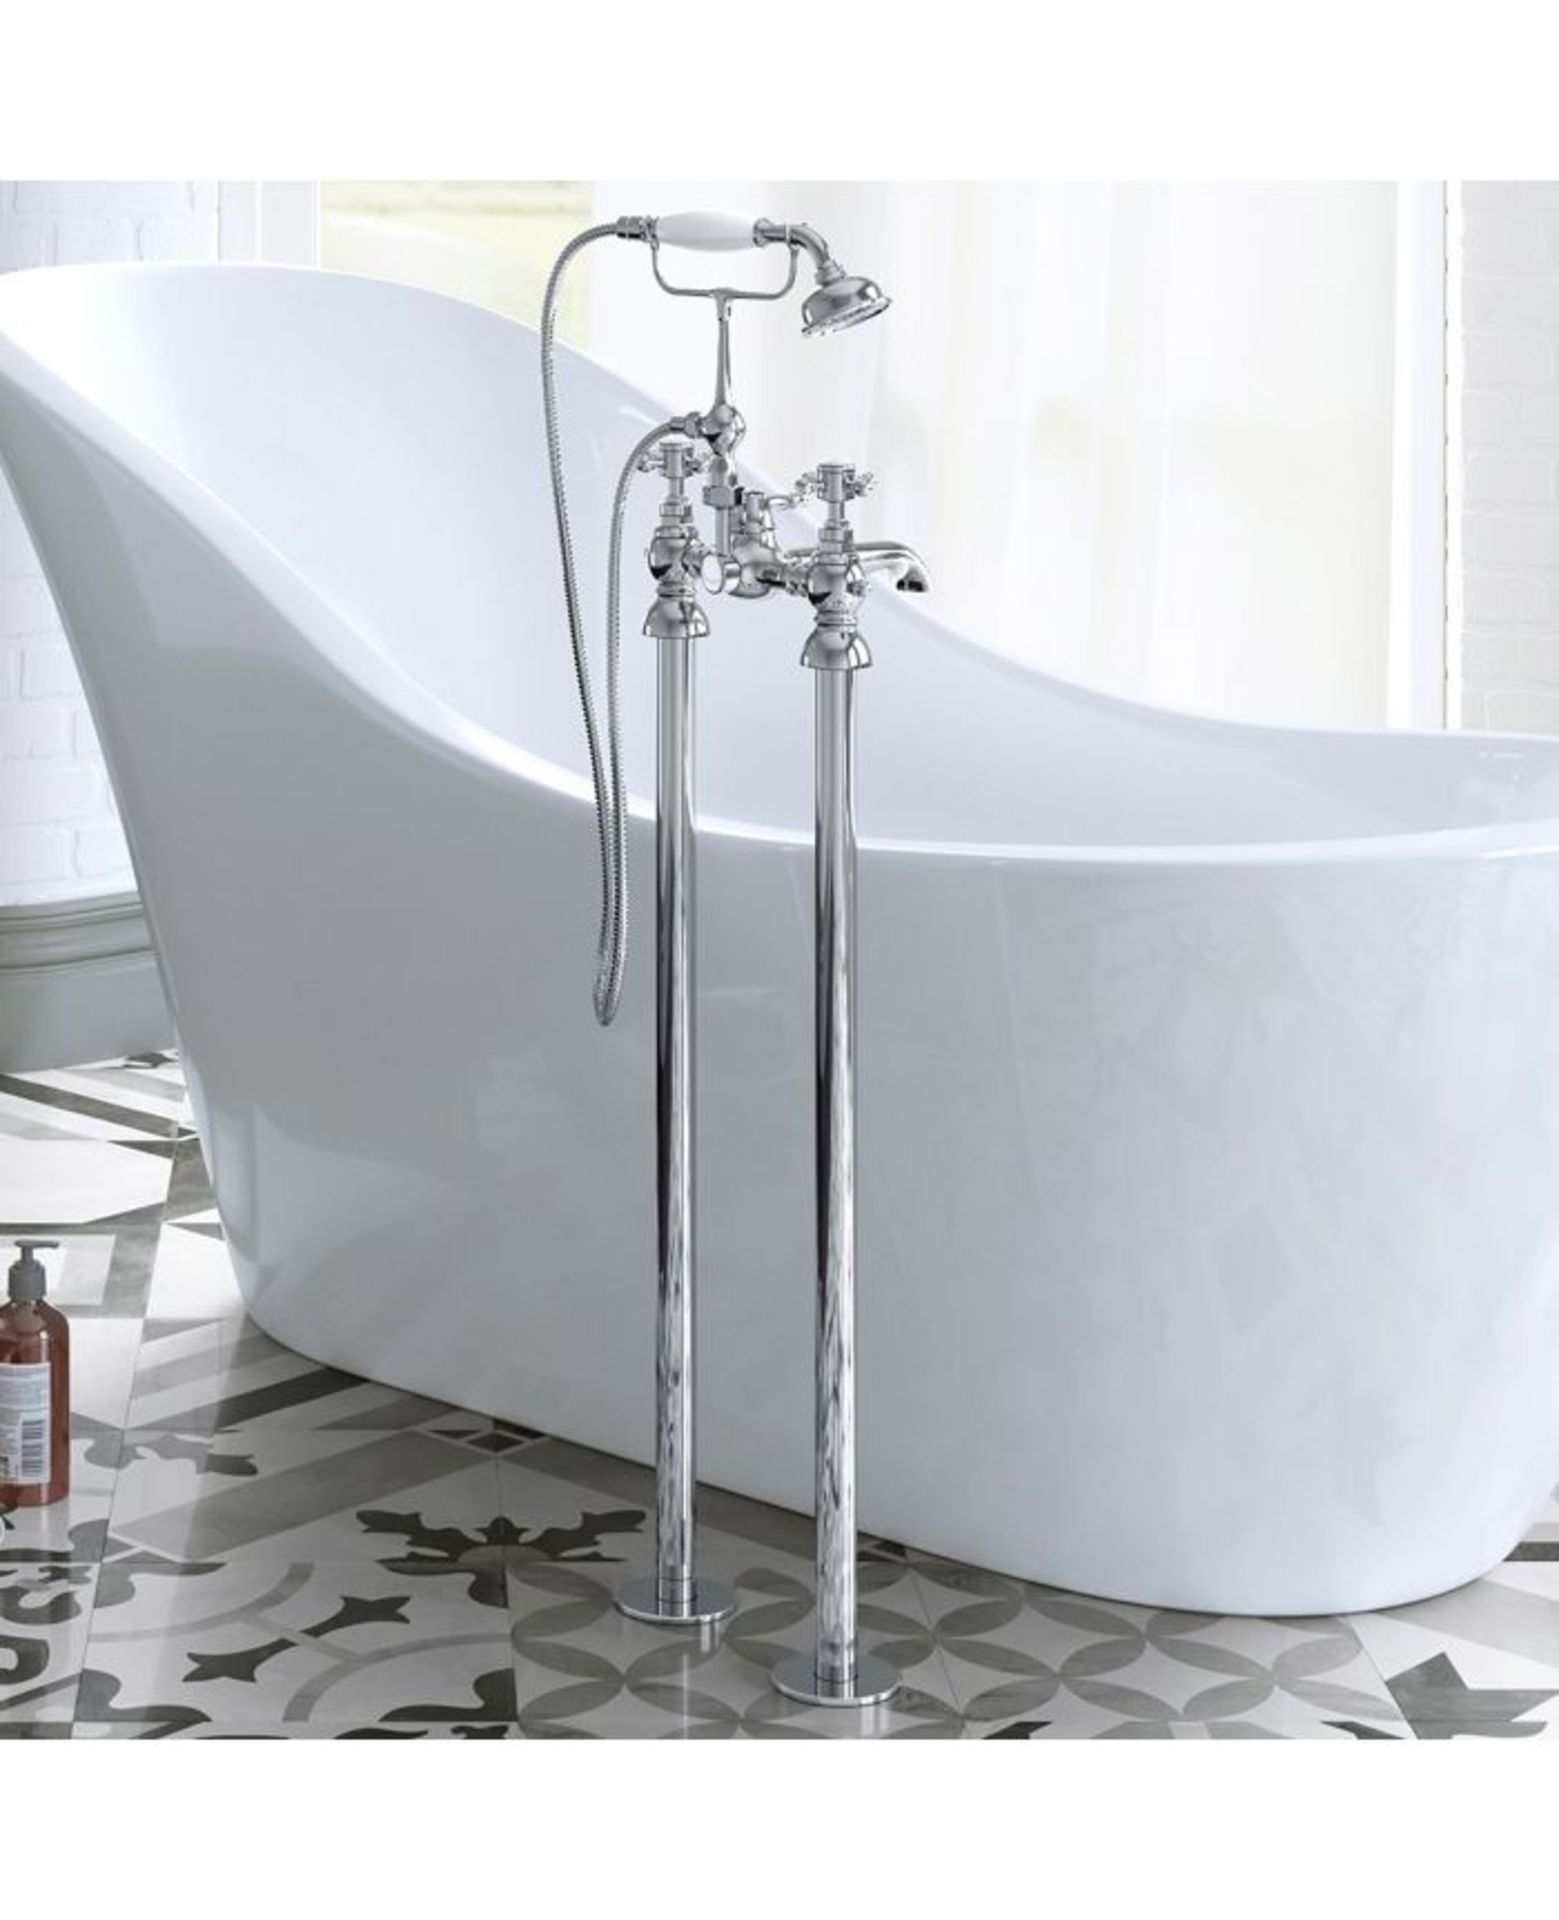 (SUPRM211) NEW Edwardian Traditional Freestanding Bath Shower Mixer Tap Chrome. RRP £392.00. The